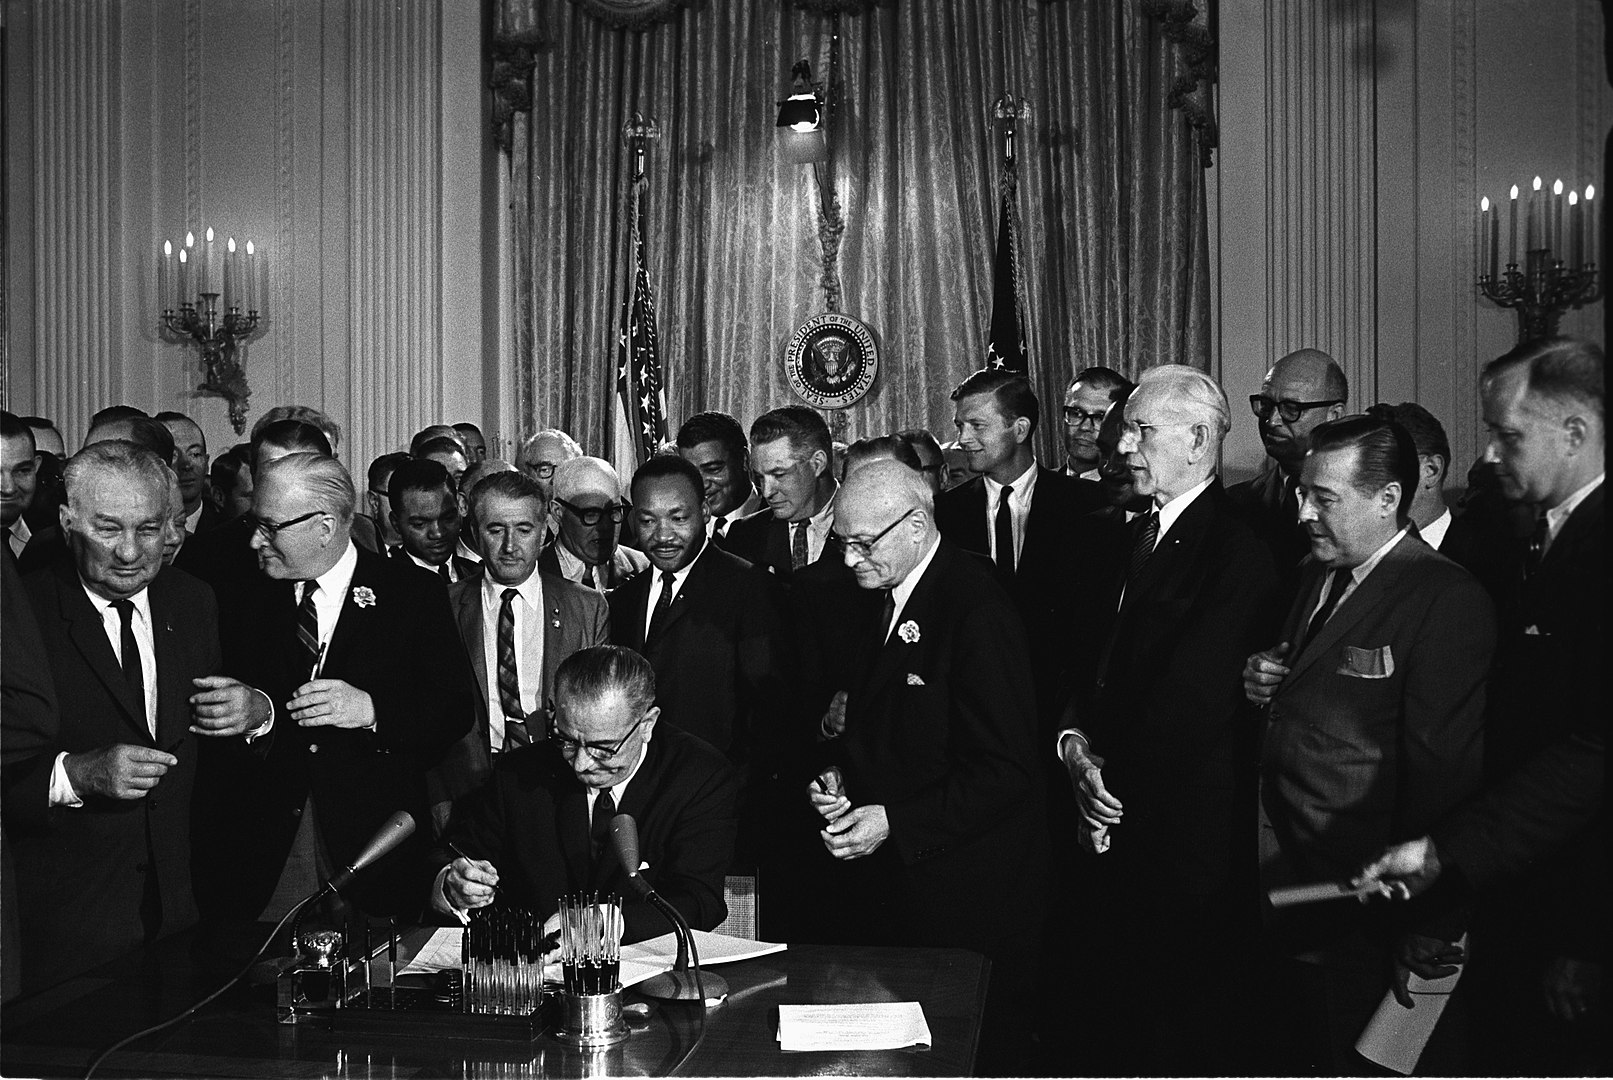 Lyndon B. Johnson signs the Civil Rights Act of 1964. Among the guests behind him is Martin Luther King, Jr.